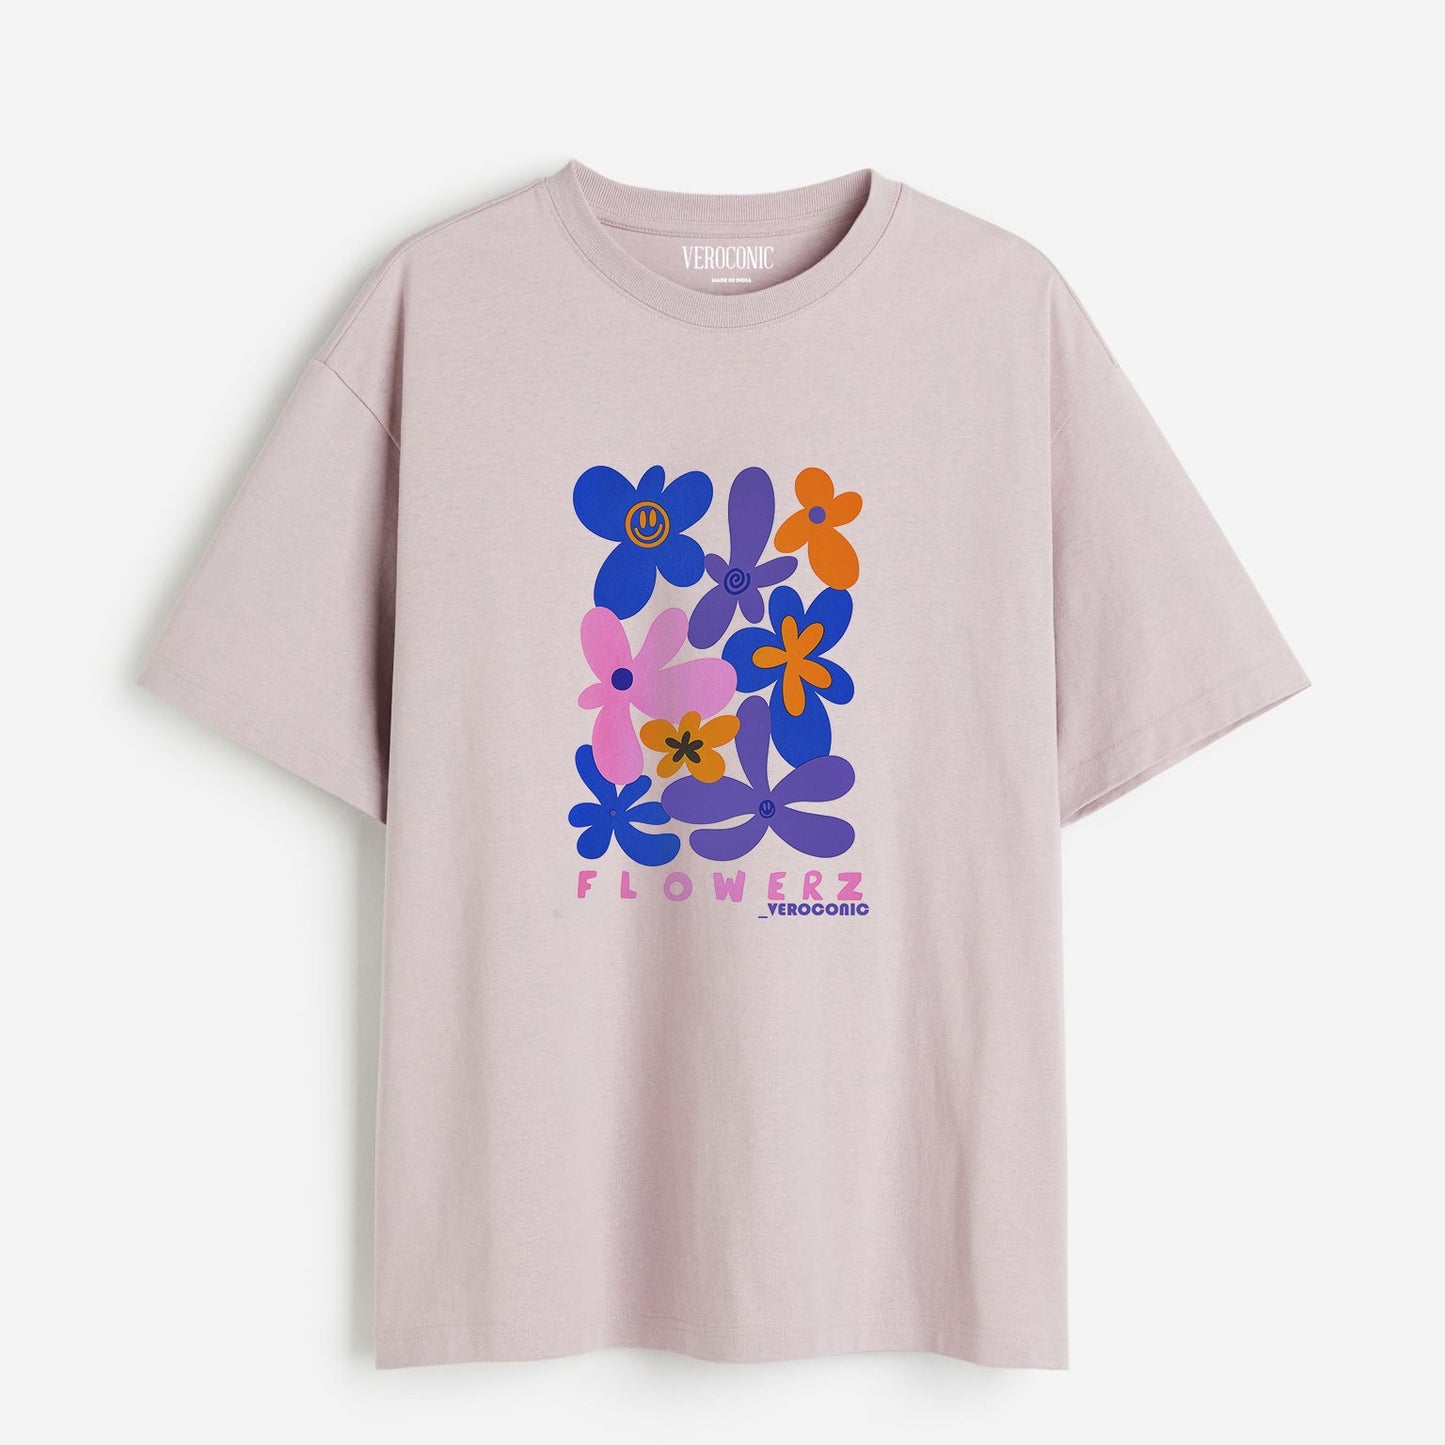 Flower Graphic Printed Oversized Lavender Cotton T-shirt